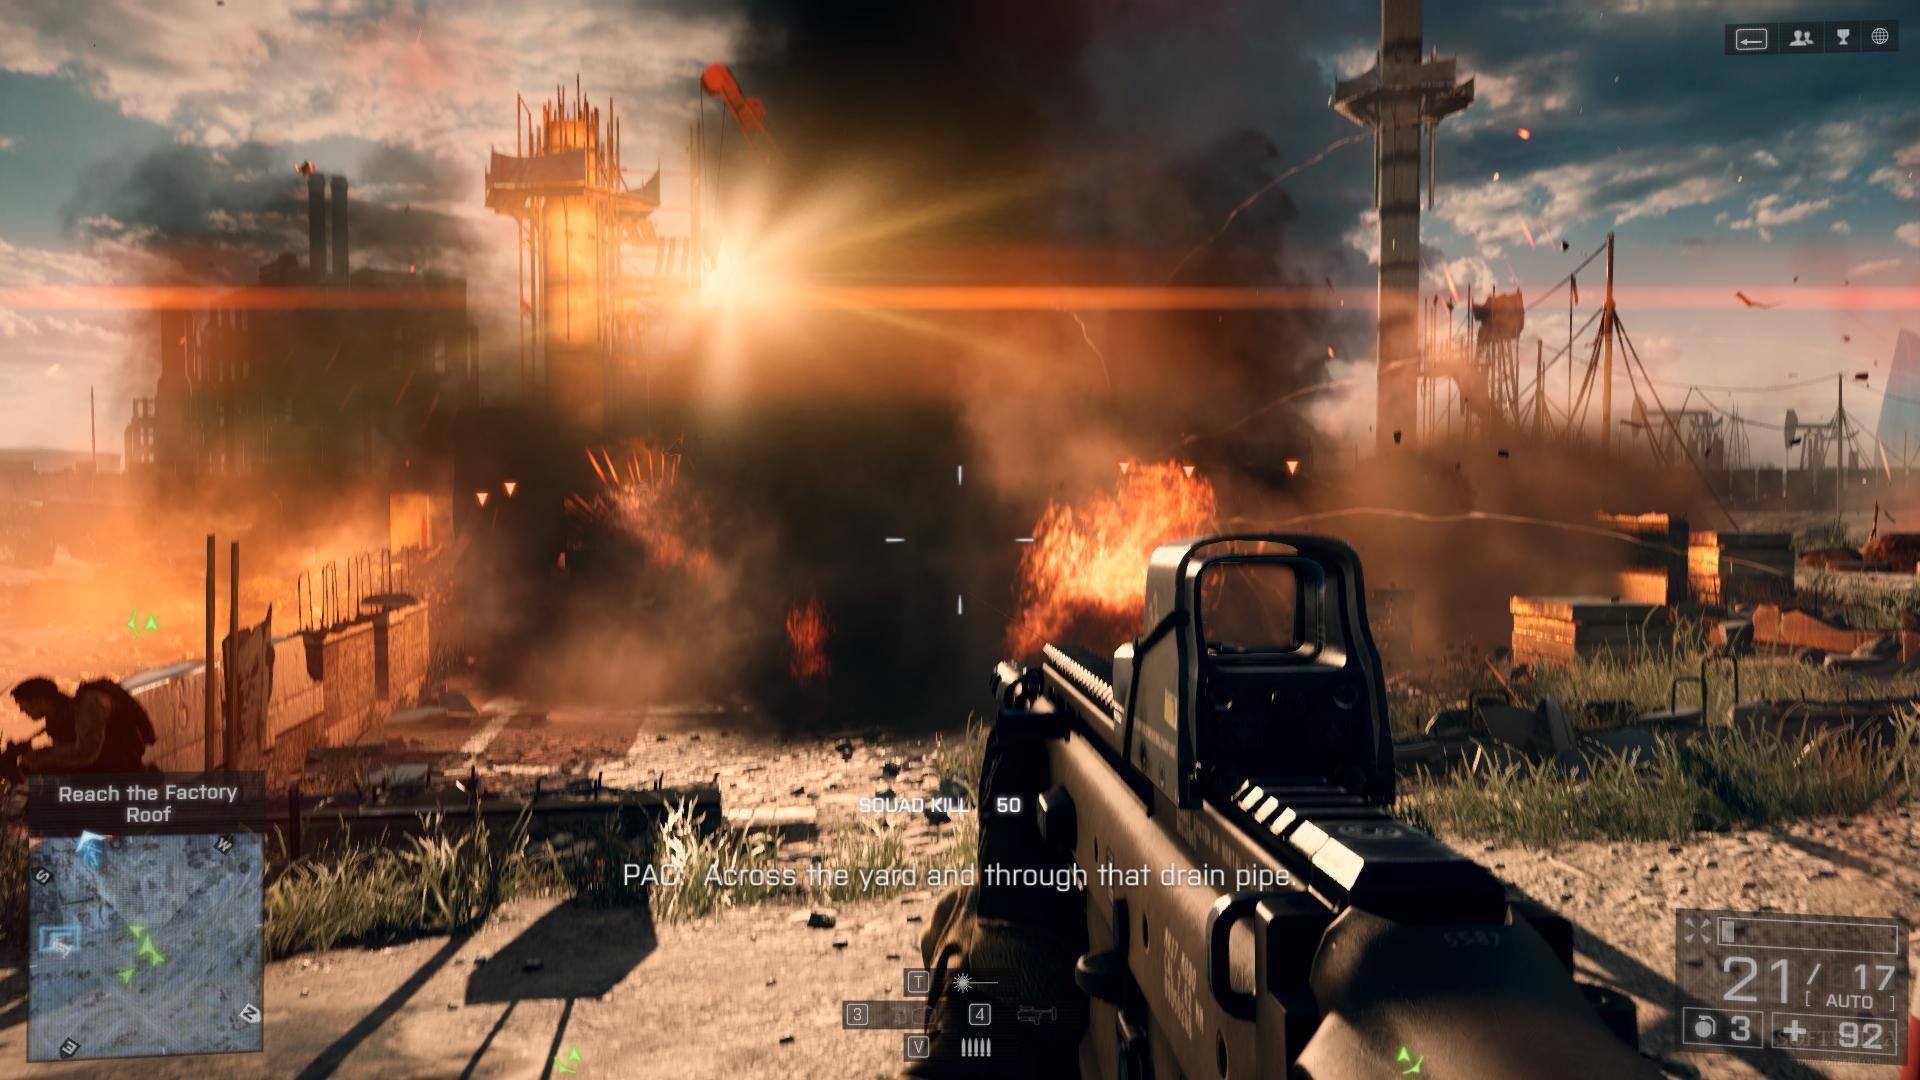 battlefield 4 for pc